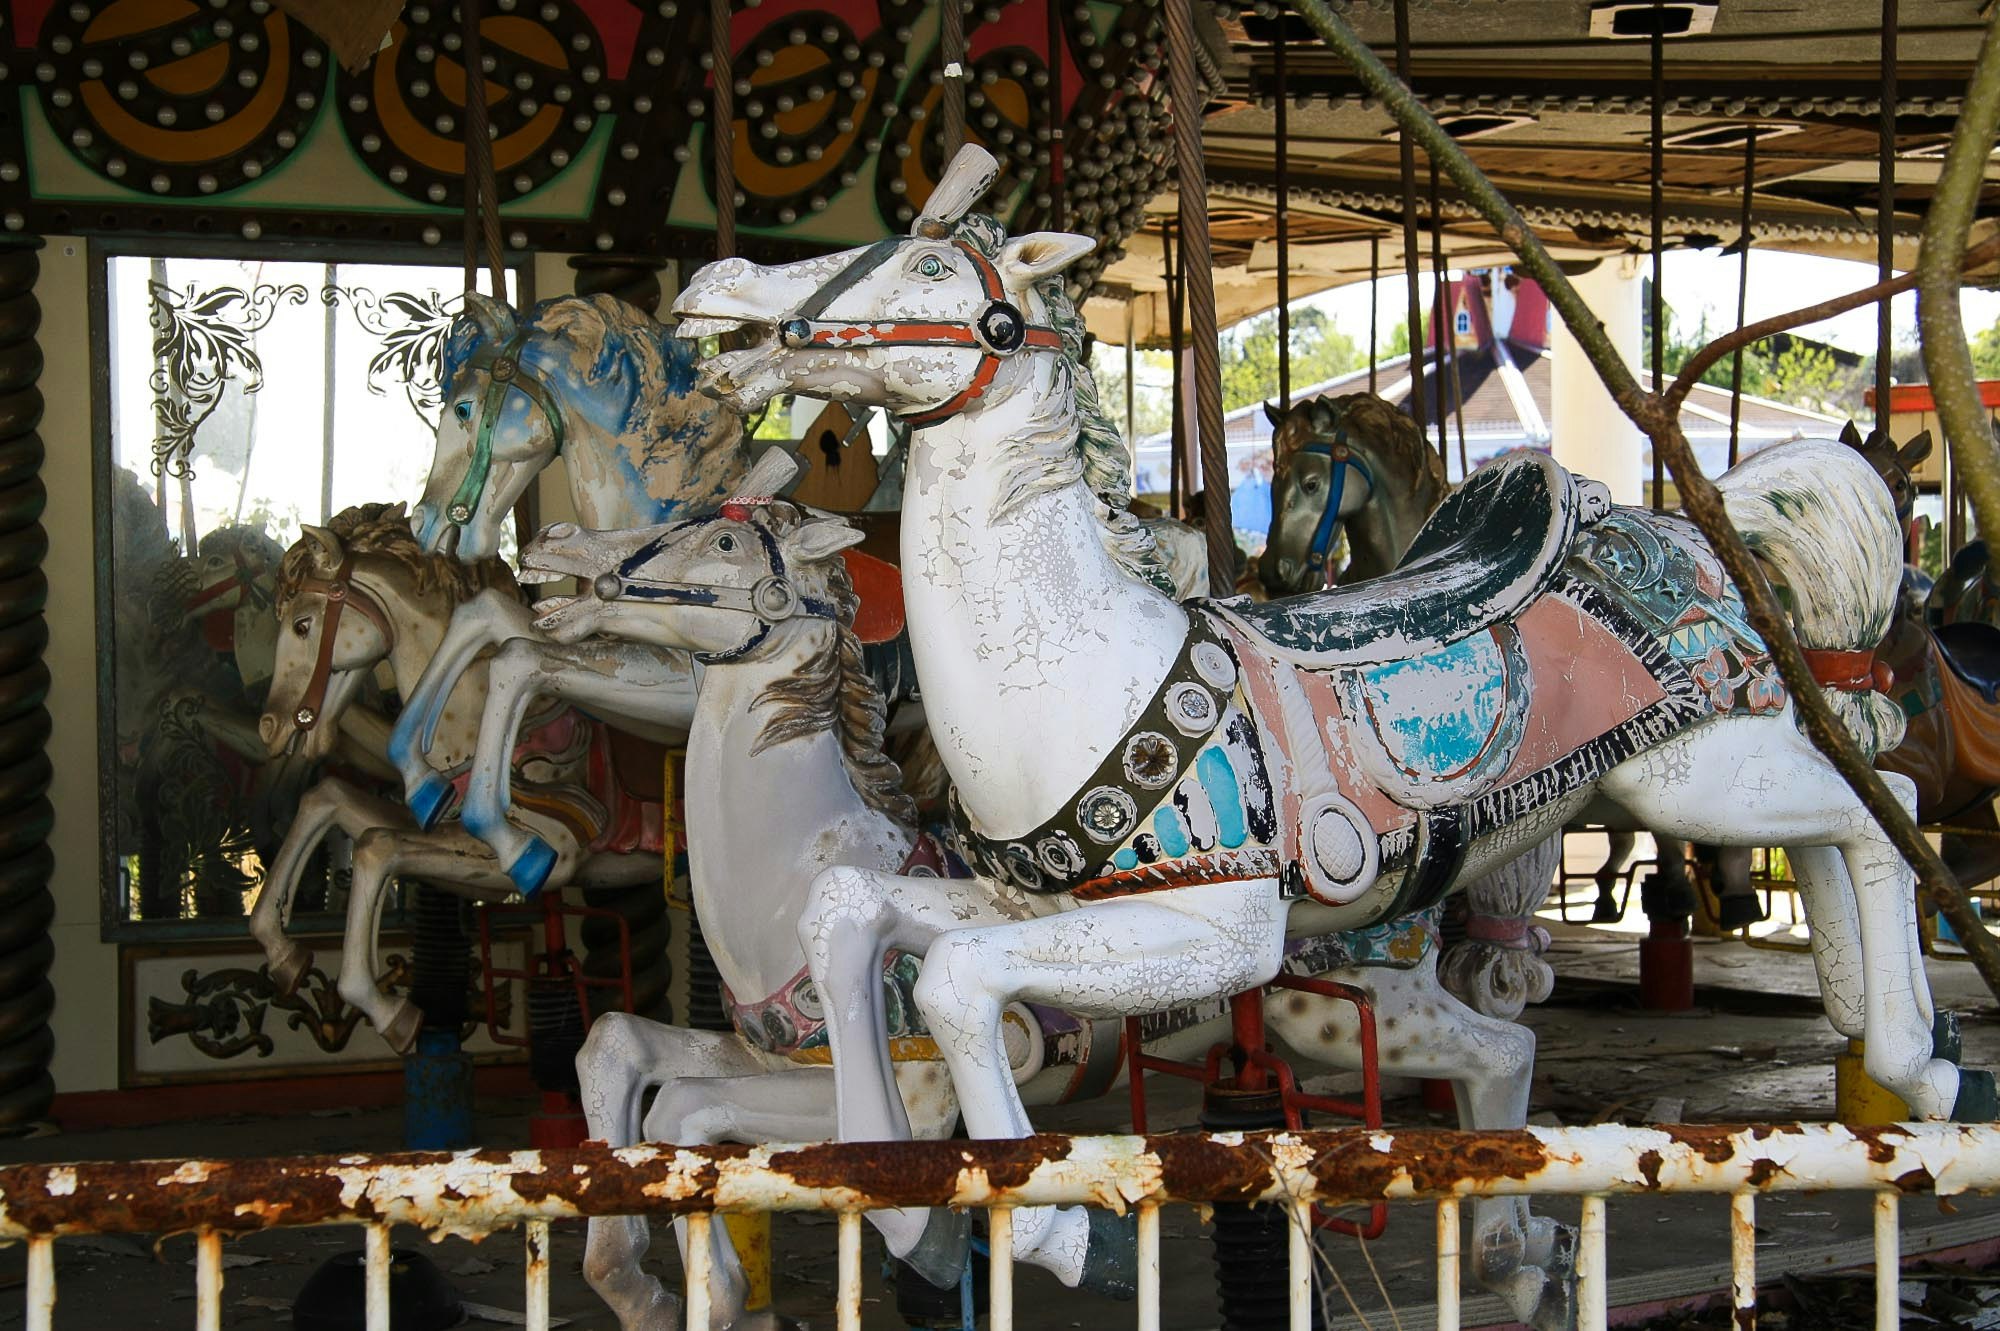 Merry-go-round horses at the abandoned Nara Dreamland park in Japan